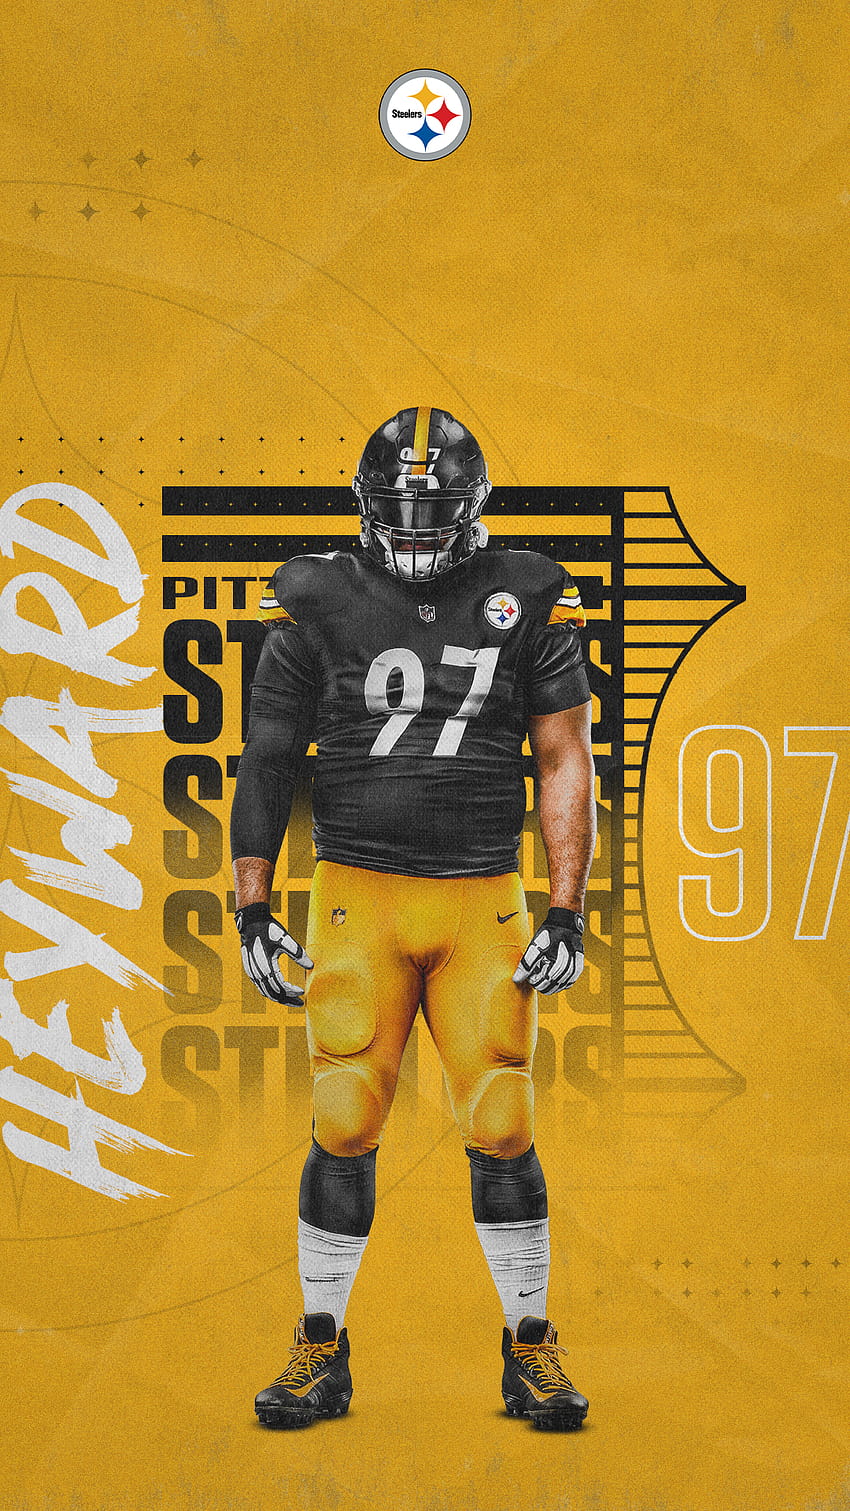 Pittsburgh Steelers Video Conferencing Backgrounds, steelers team HD phone wallpaper